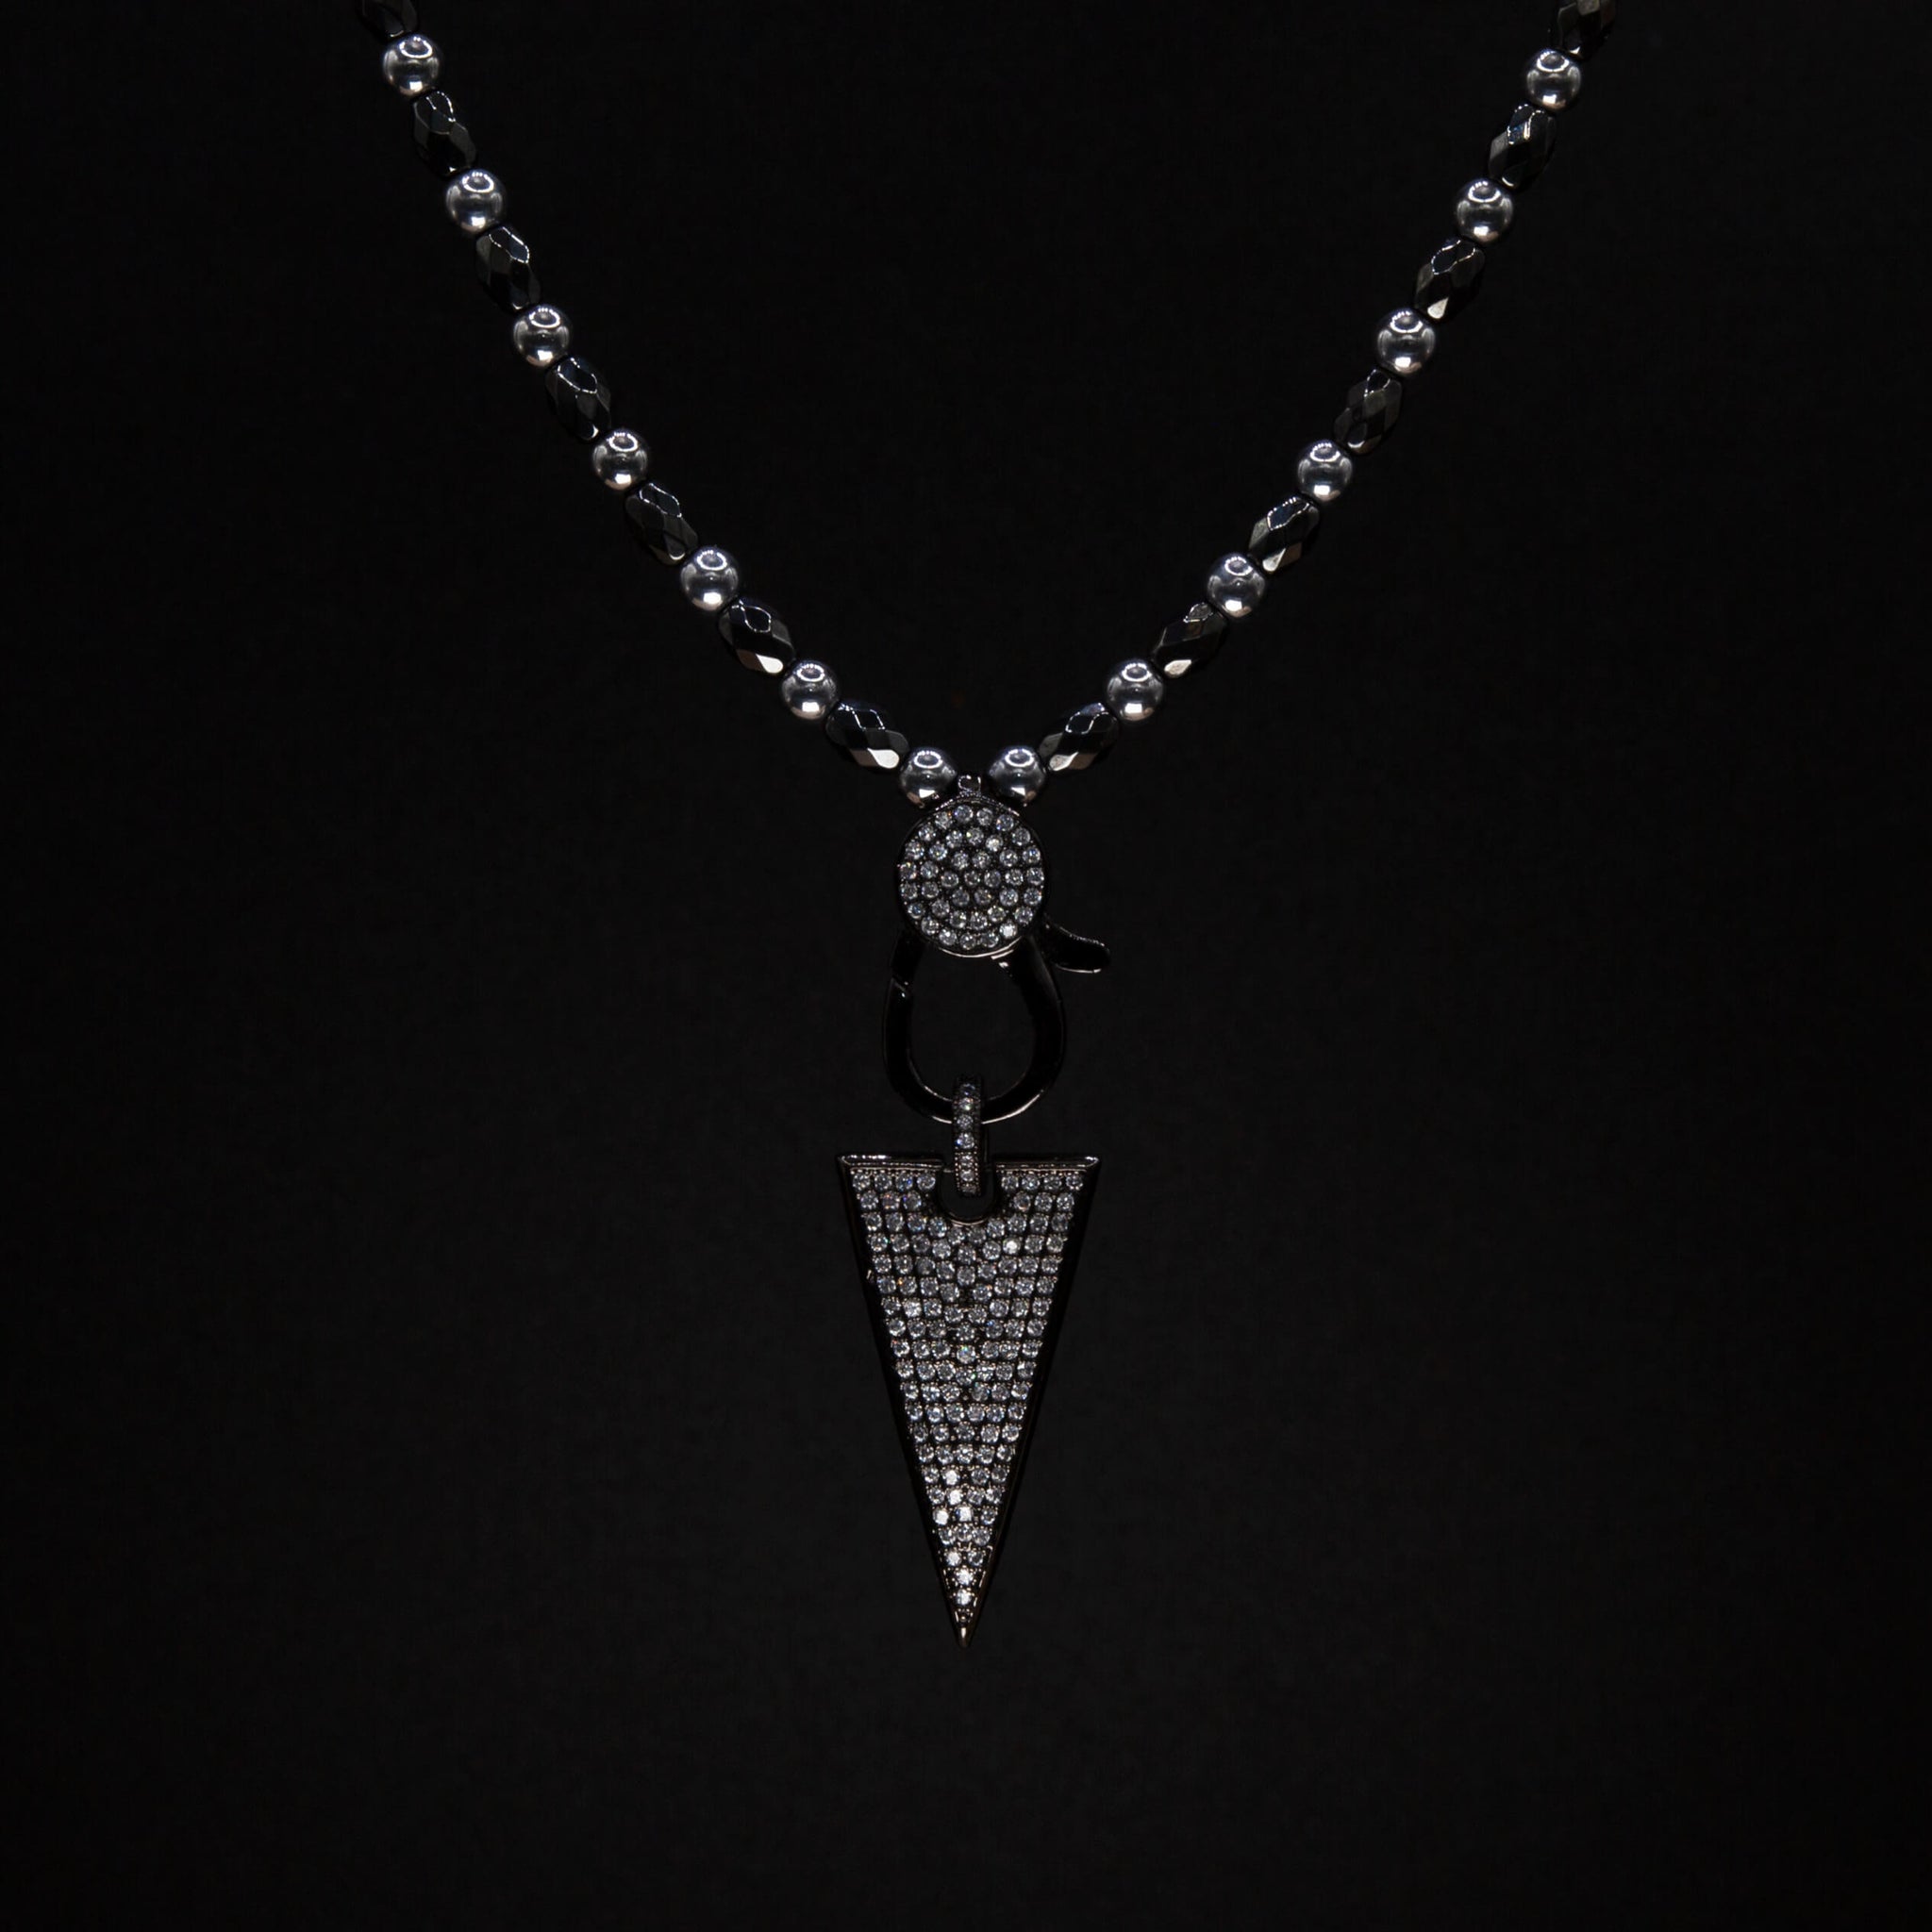 Hematite Necklace with Triangle Pendant